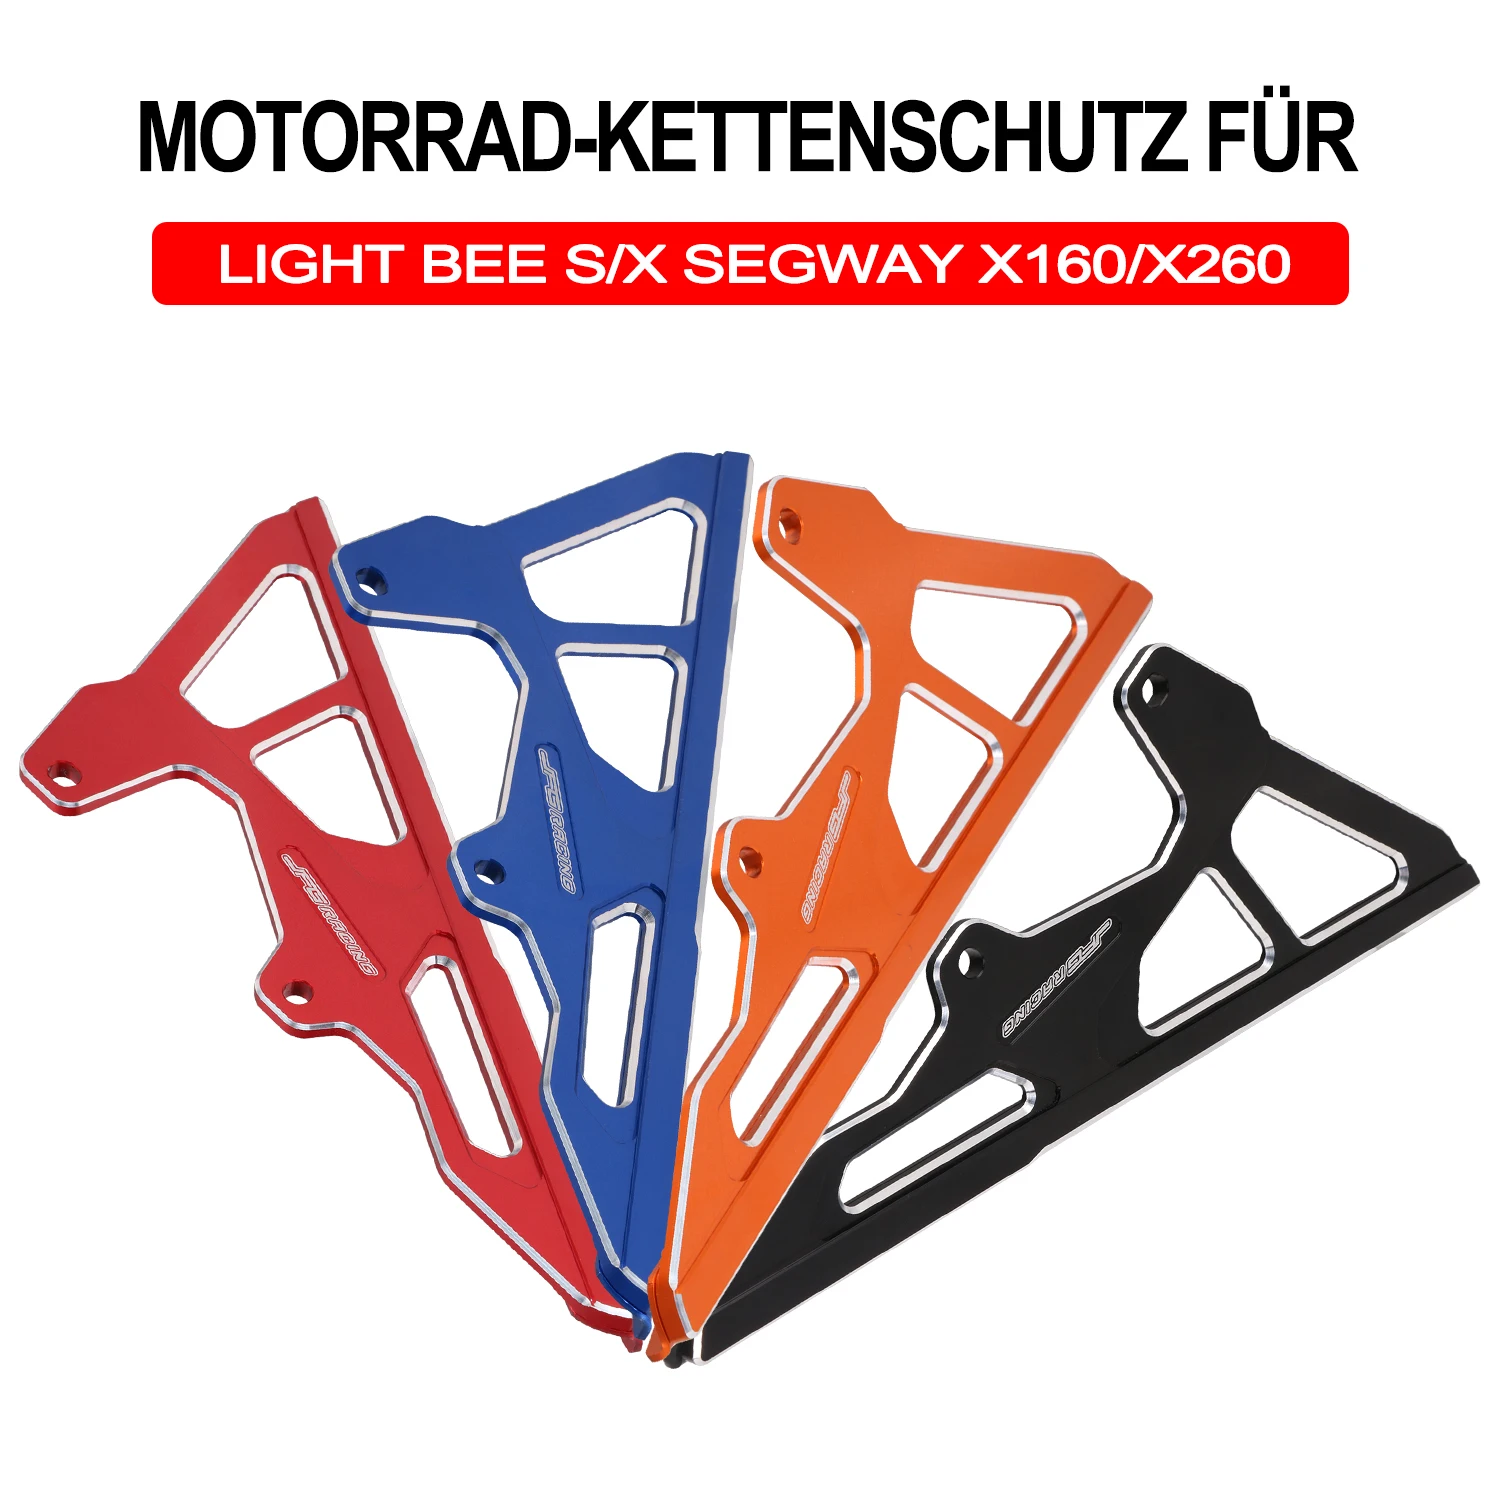 JFG RACING Sur Ron Chain Guards Cover,Chain Shield Protection For Light Bee & Light Bee X 